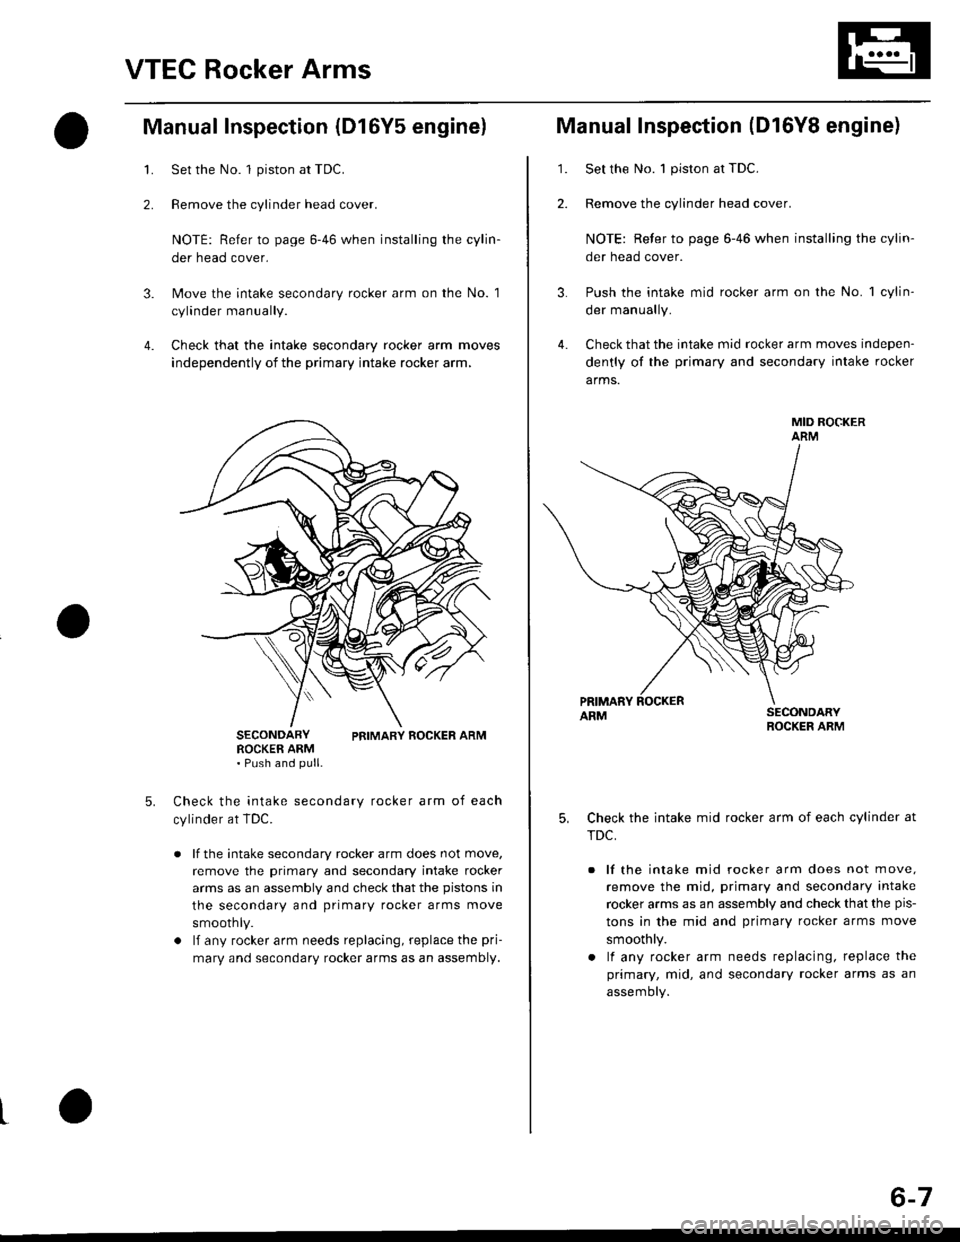 HONDA CIVIC 1997 6.G Workshop Manual VTEC Rocker Arms
2.
Manual Inspection (D16Y5 engine)
3.
1.
4.
Set the No. 1 piston at TDC.
Remove the cylinder head cover.
NOTE: Refer to page 6-46 when installing the cylin-
der head cover.
Move the 